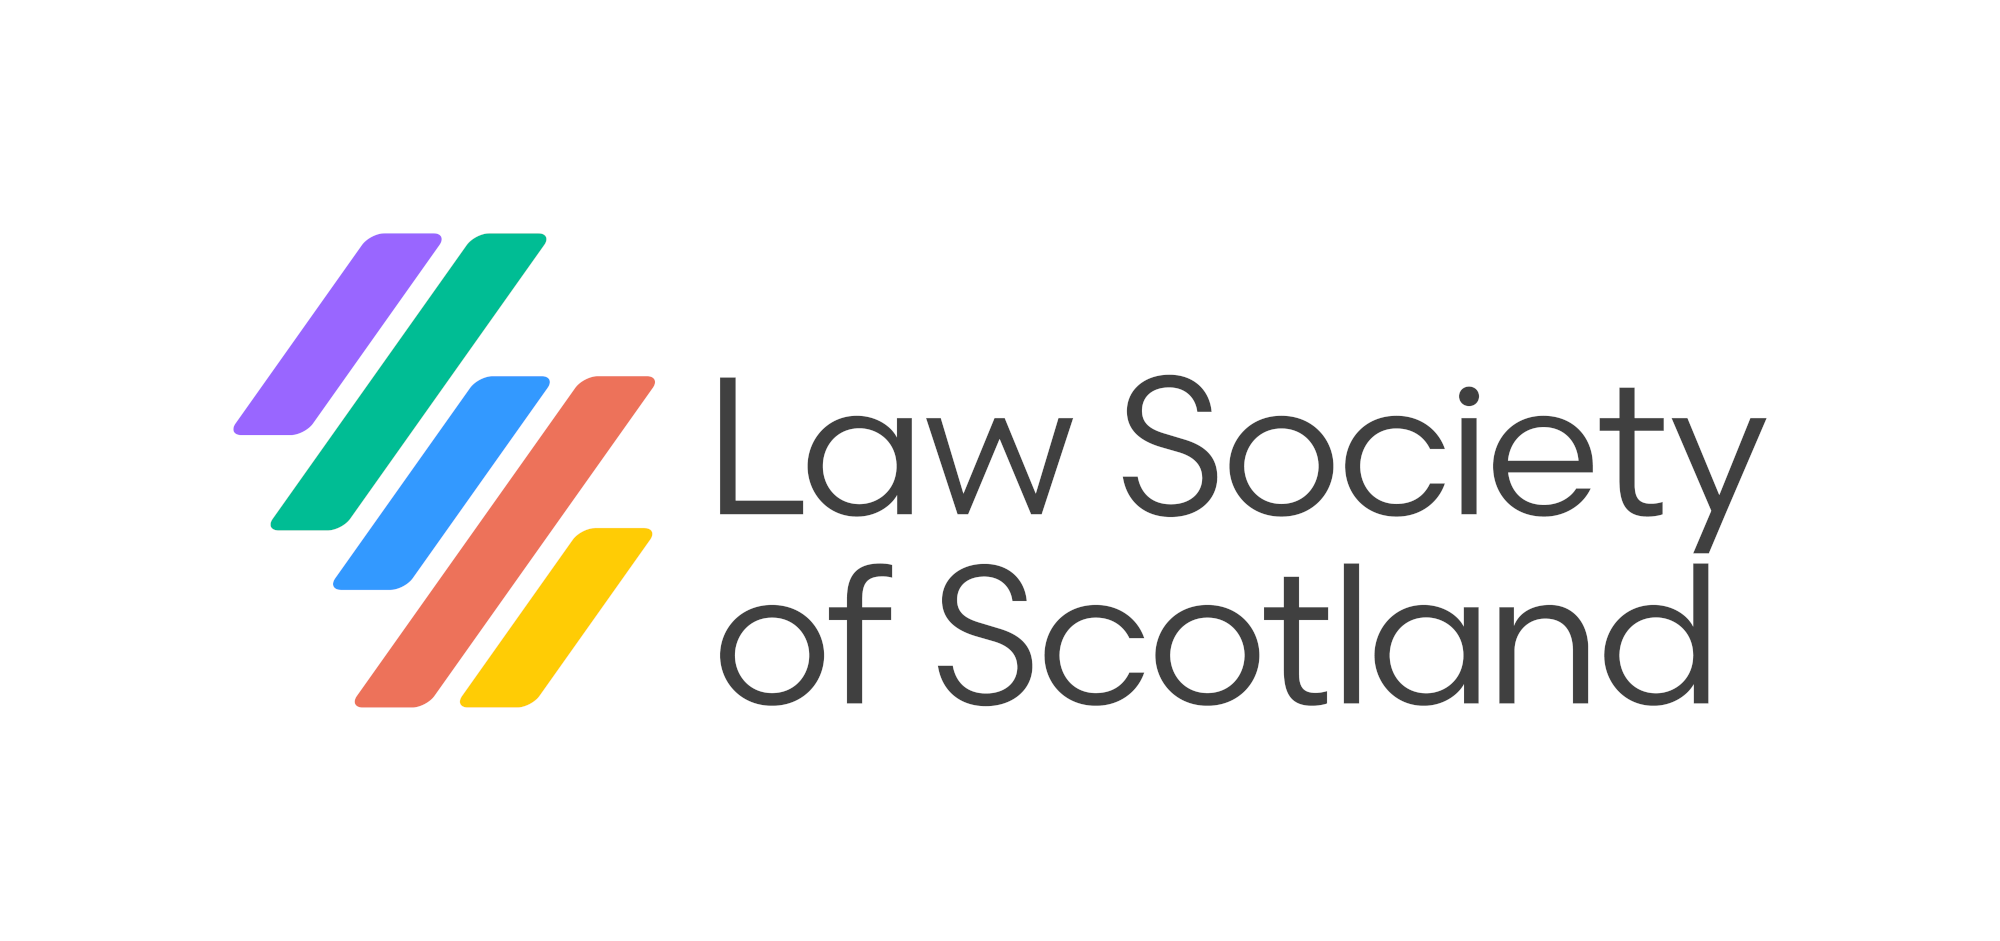 Law Society: AML regulations need greater clarity for legal sector